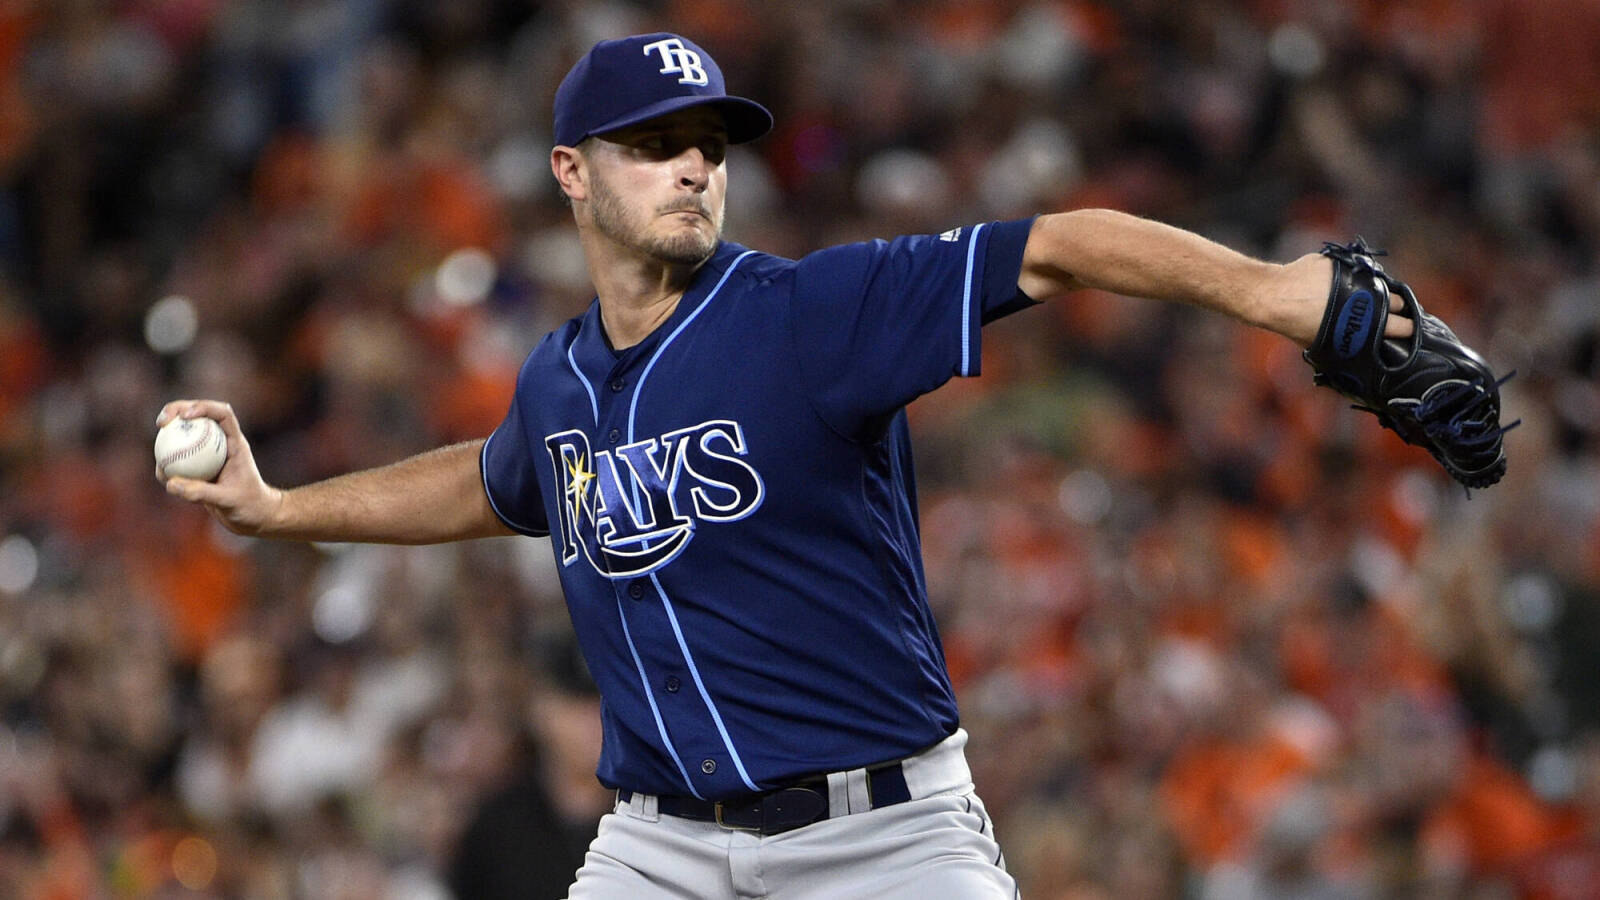 Rays reunion with former All-Star pitcher doesn't last long